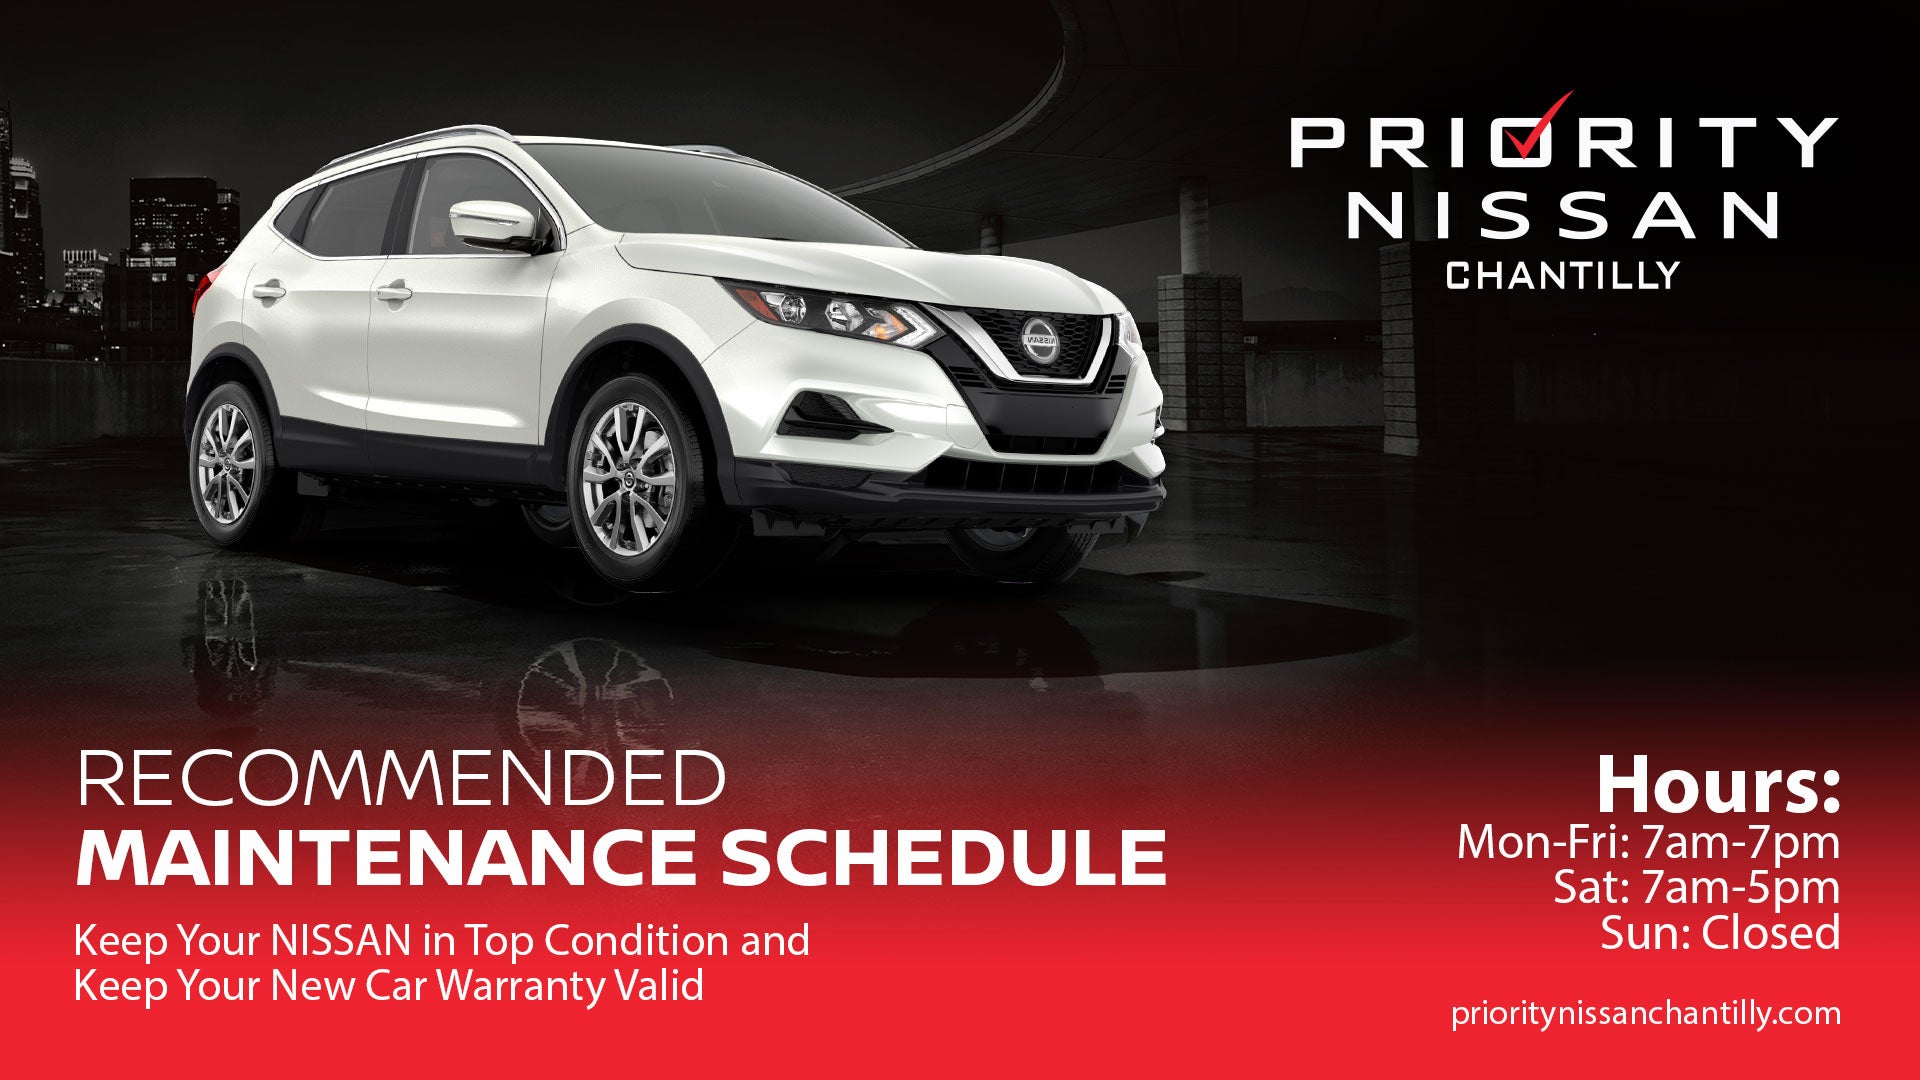 Priority Nissan Chantilly Recommended Maintenance Schedule